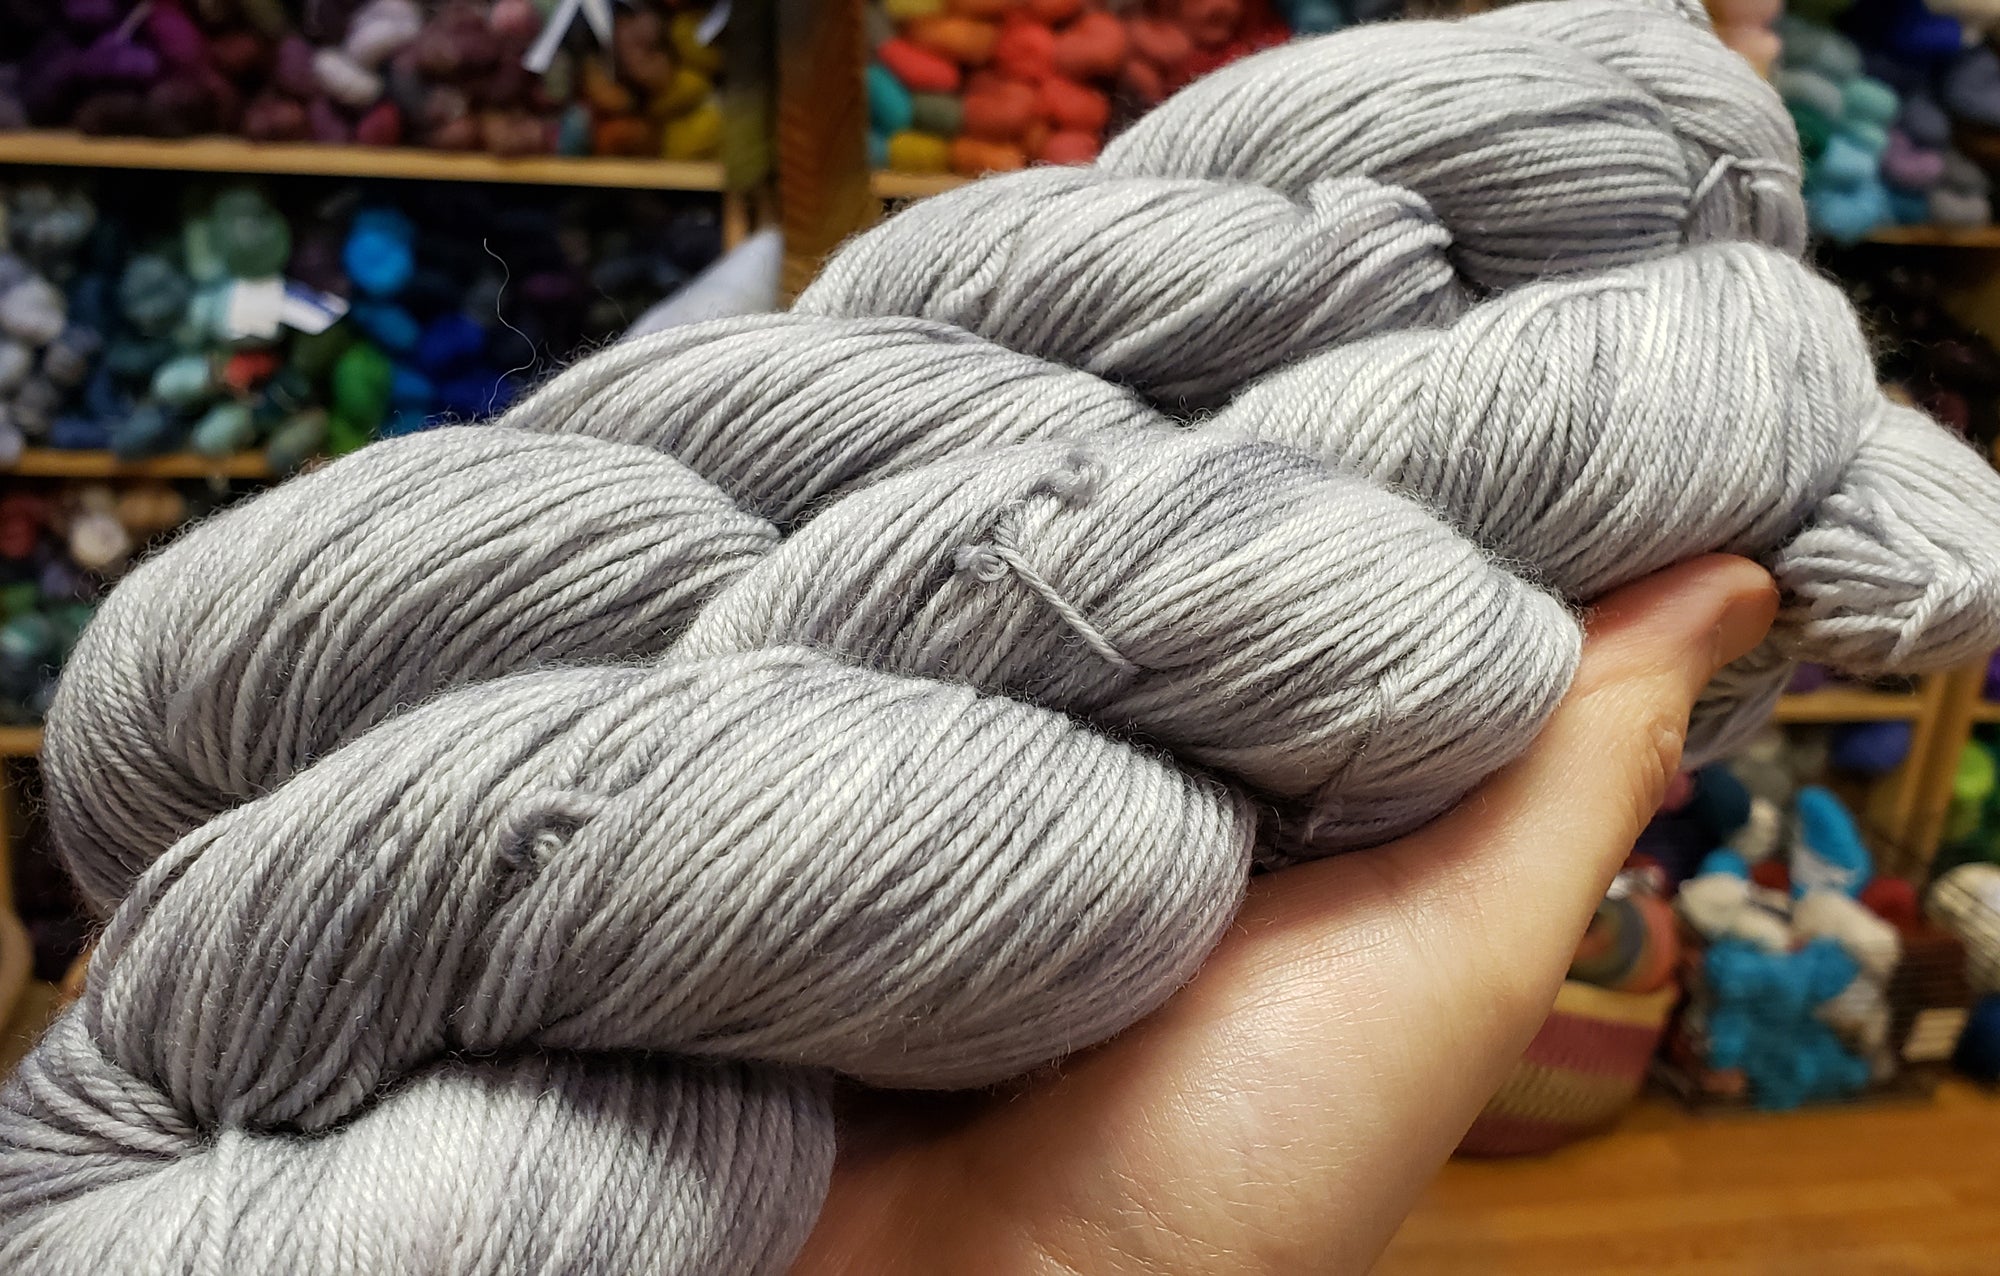 Fall Drizzle - Hand dyed variegated speckled yarn - Merino Fingering t